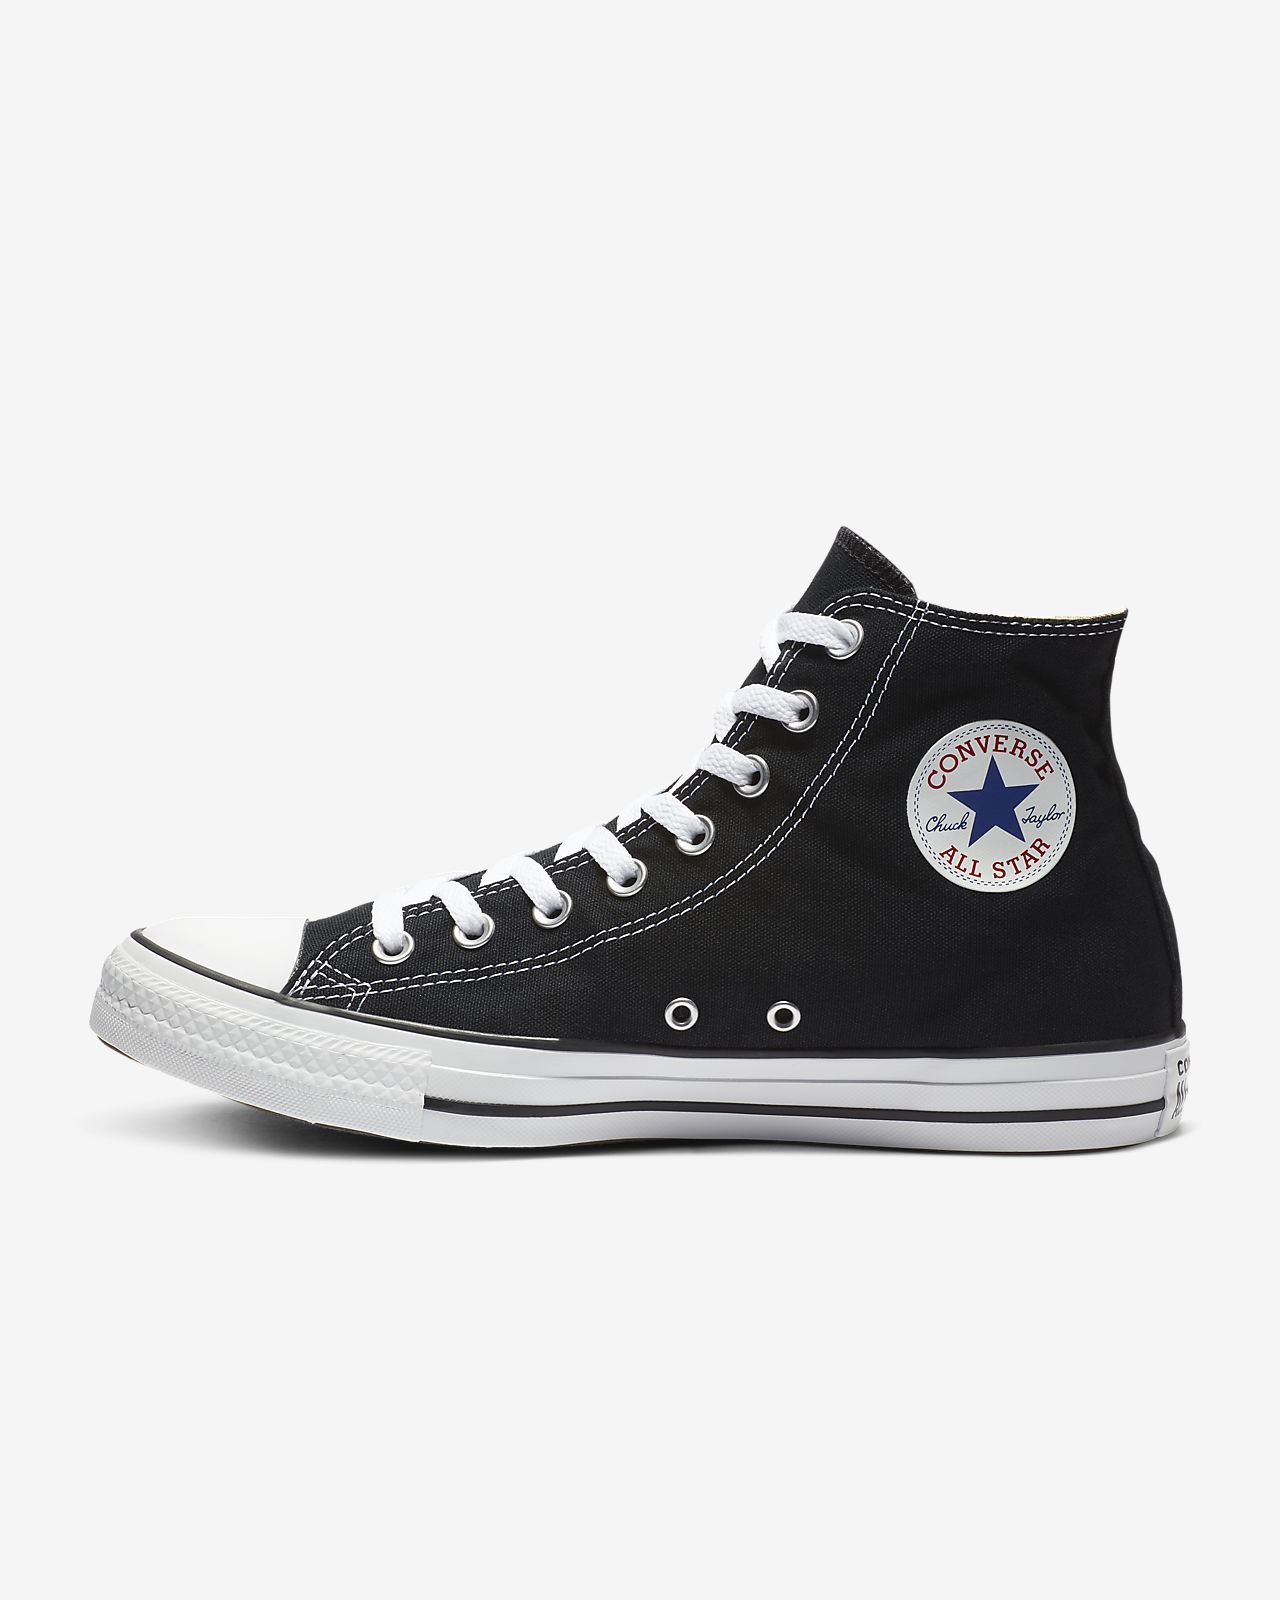 Ouf! 46+ VÃ©ritÃ©s sur Converse All Star Hi: 5.0 out of 5 stars 2. - fosterthepeopleidfan